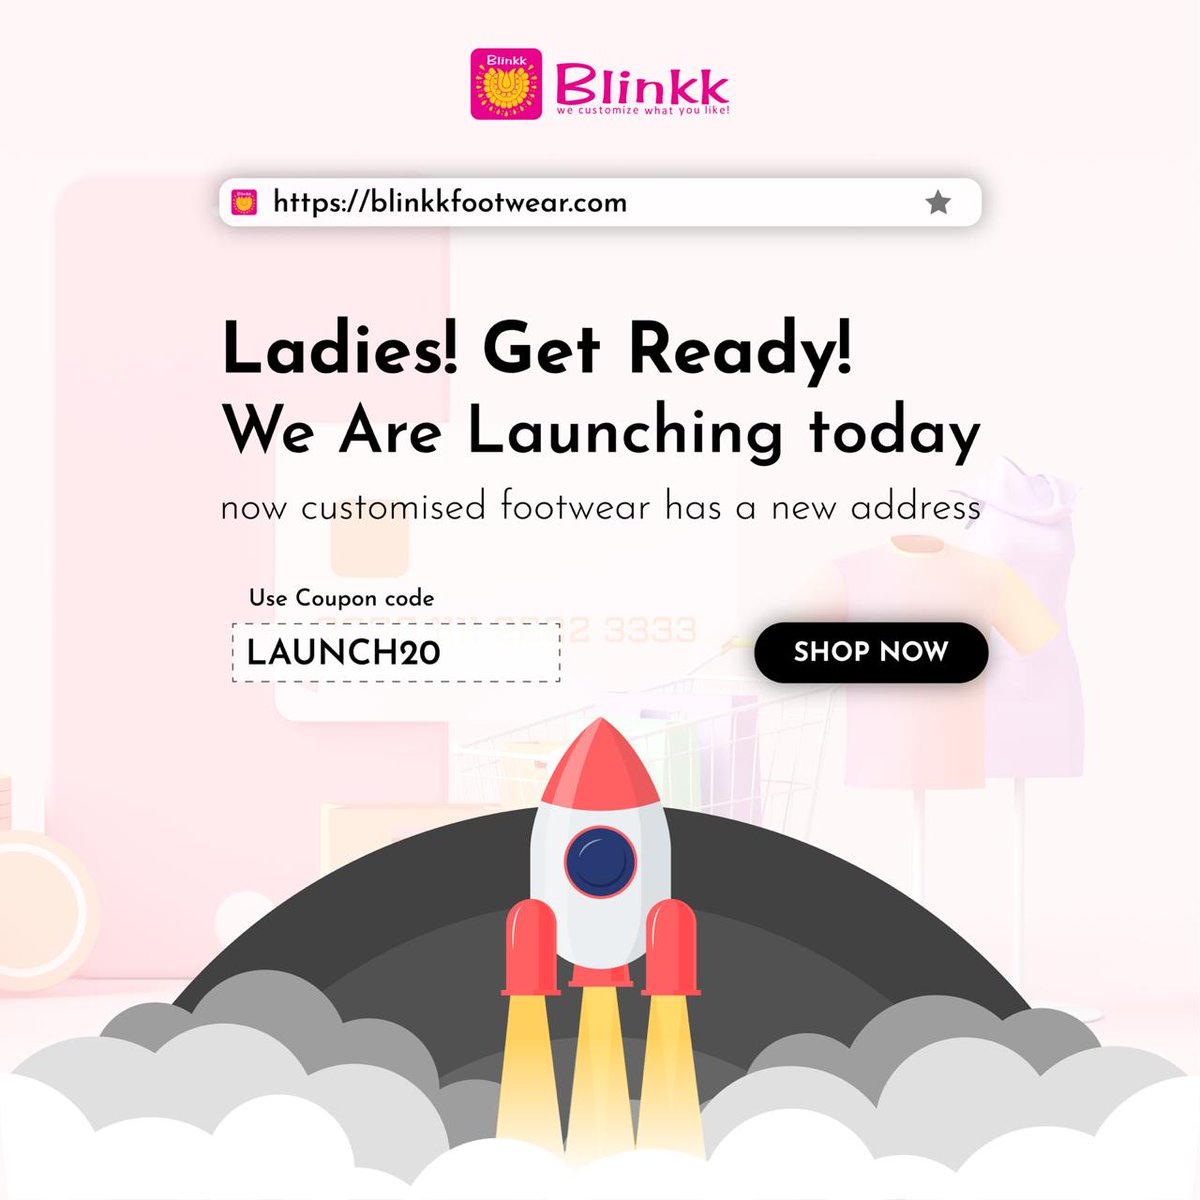 It's Live! 💃 We are delighted to announce launch of our exclusive ONLINE store! Use code LAUNCH20 for flat 20% discount. Shop on blinkkfootwear.com